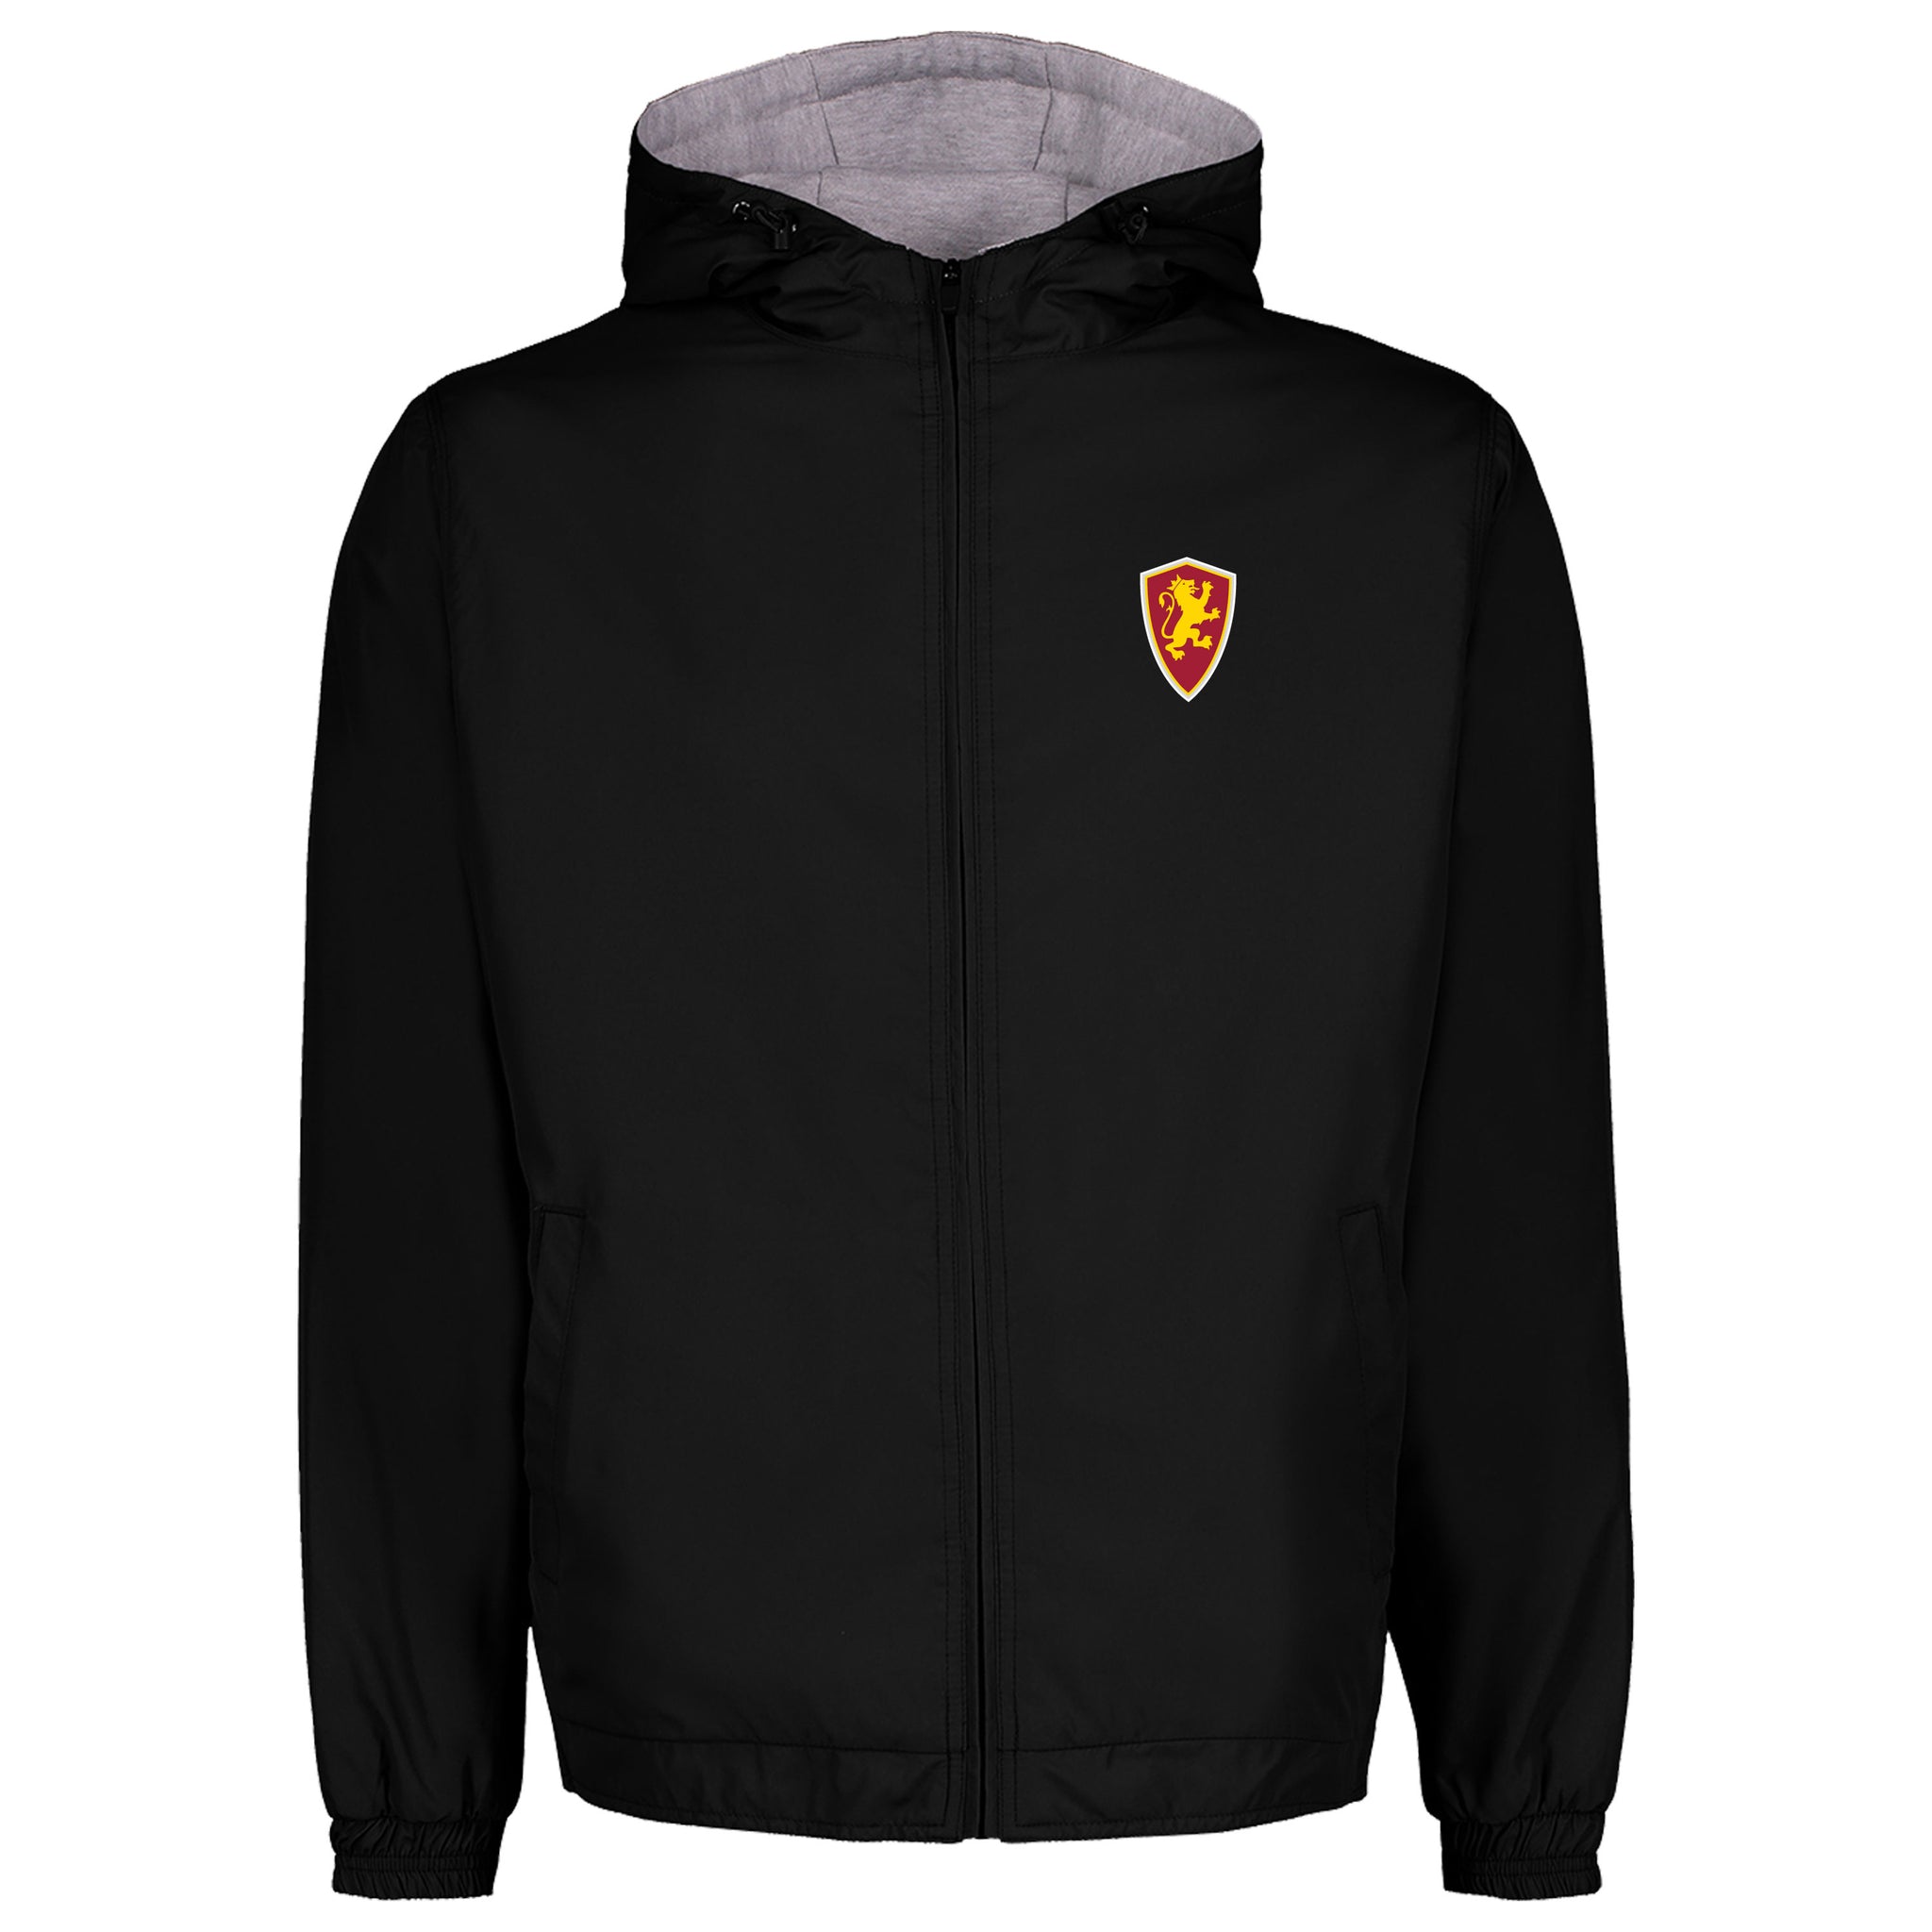 Black full zip jacket with grey lining with Flagler College shield logo 